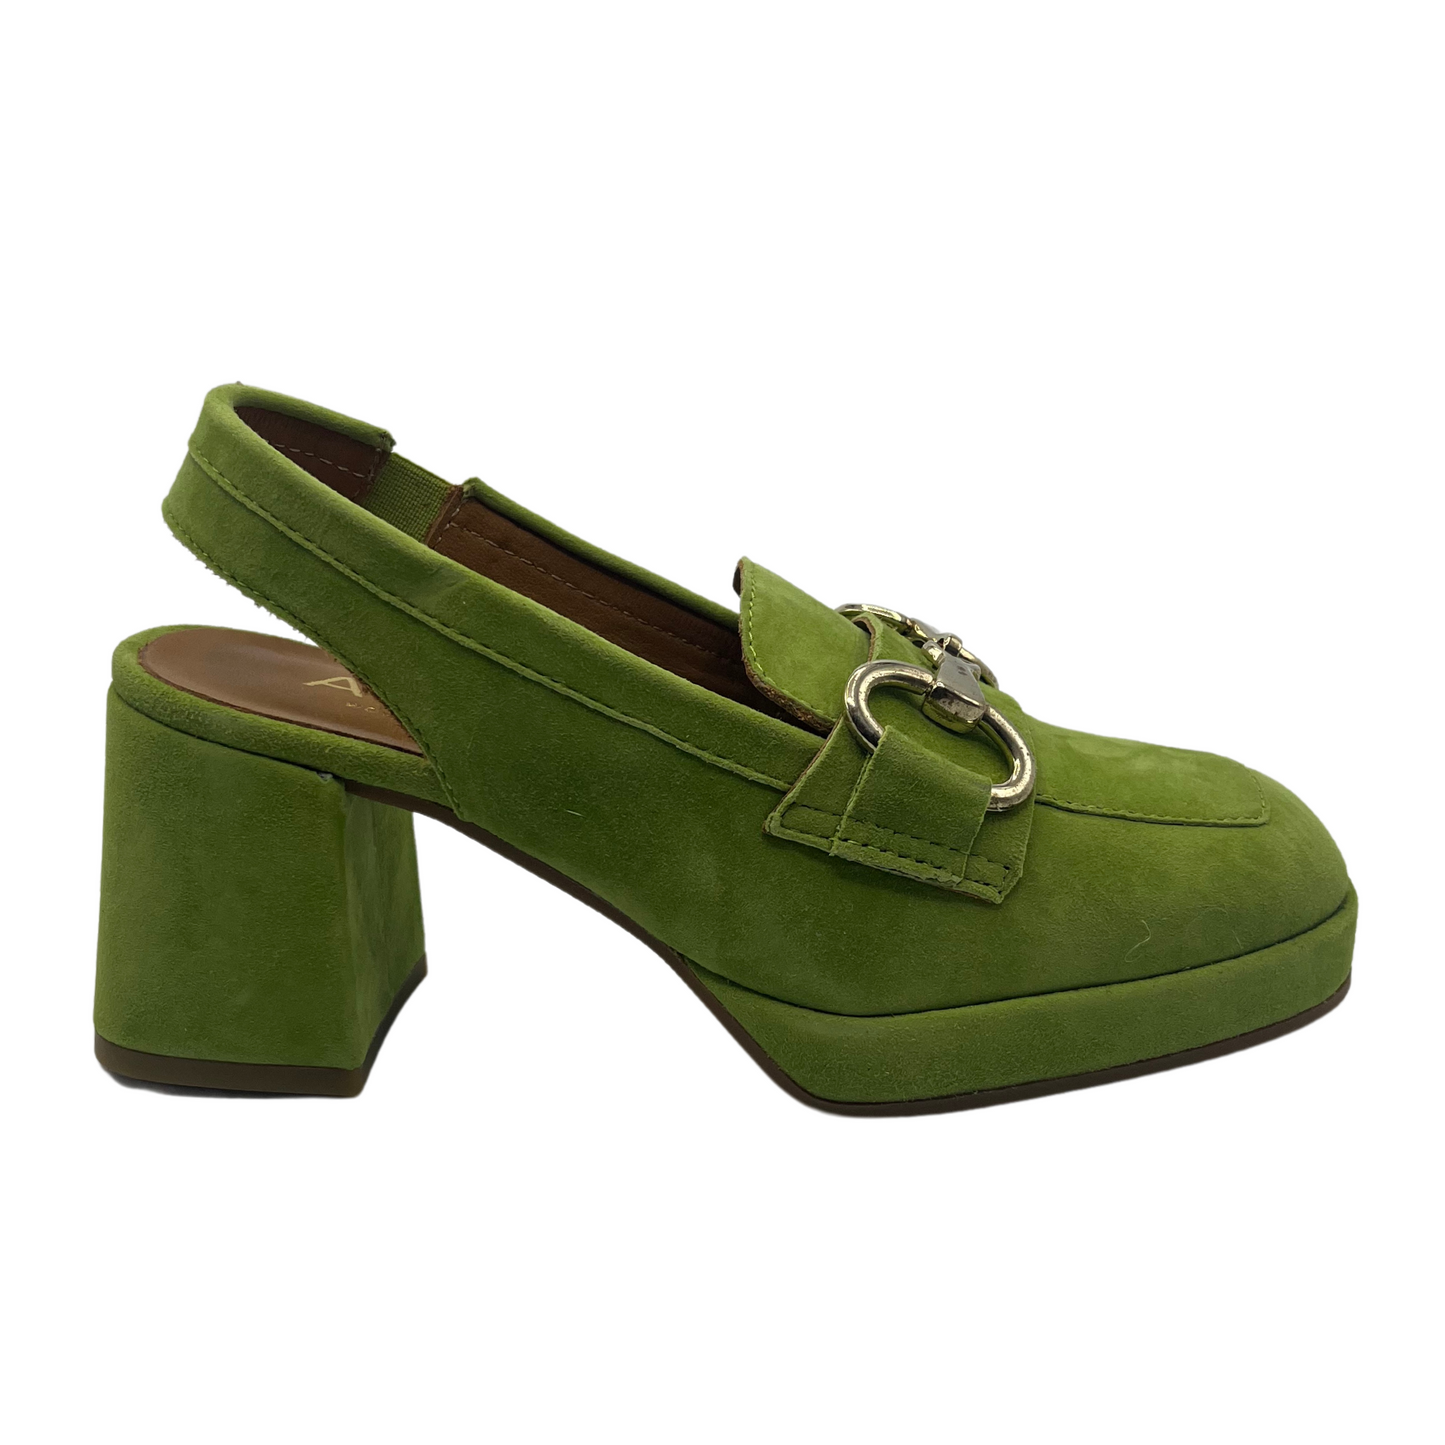 Right facing view of green suede sling back loafer with chunky heel and gold bit detail on upper